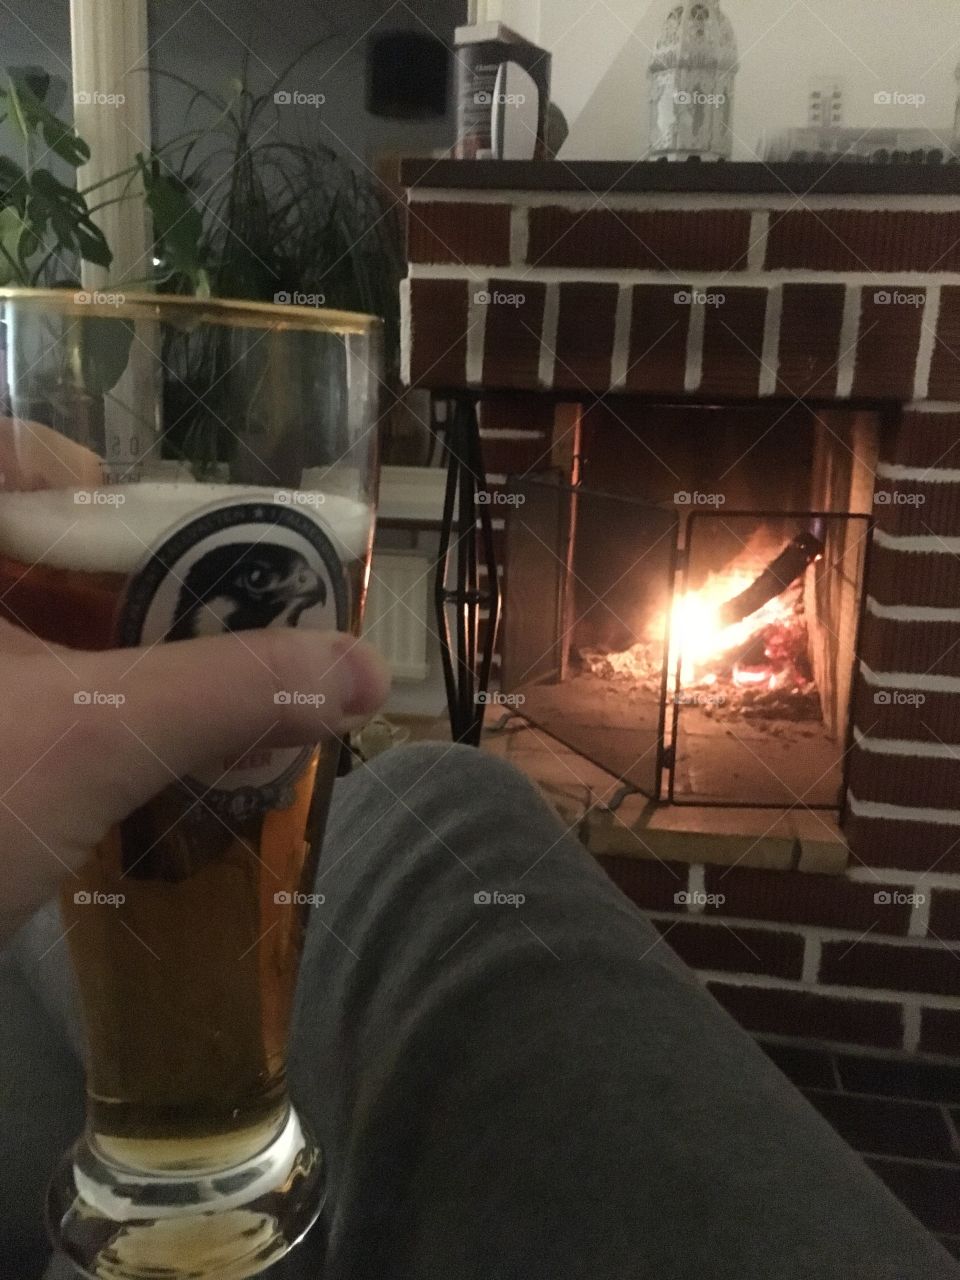 A cold beer at the fire. Nothing beats that. 